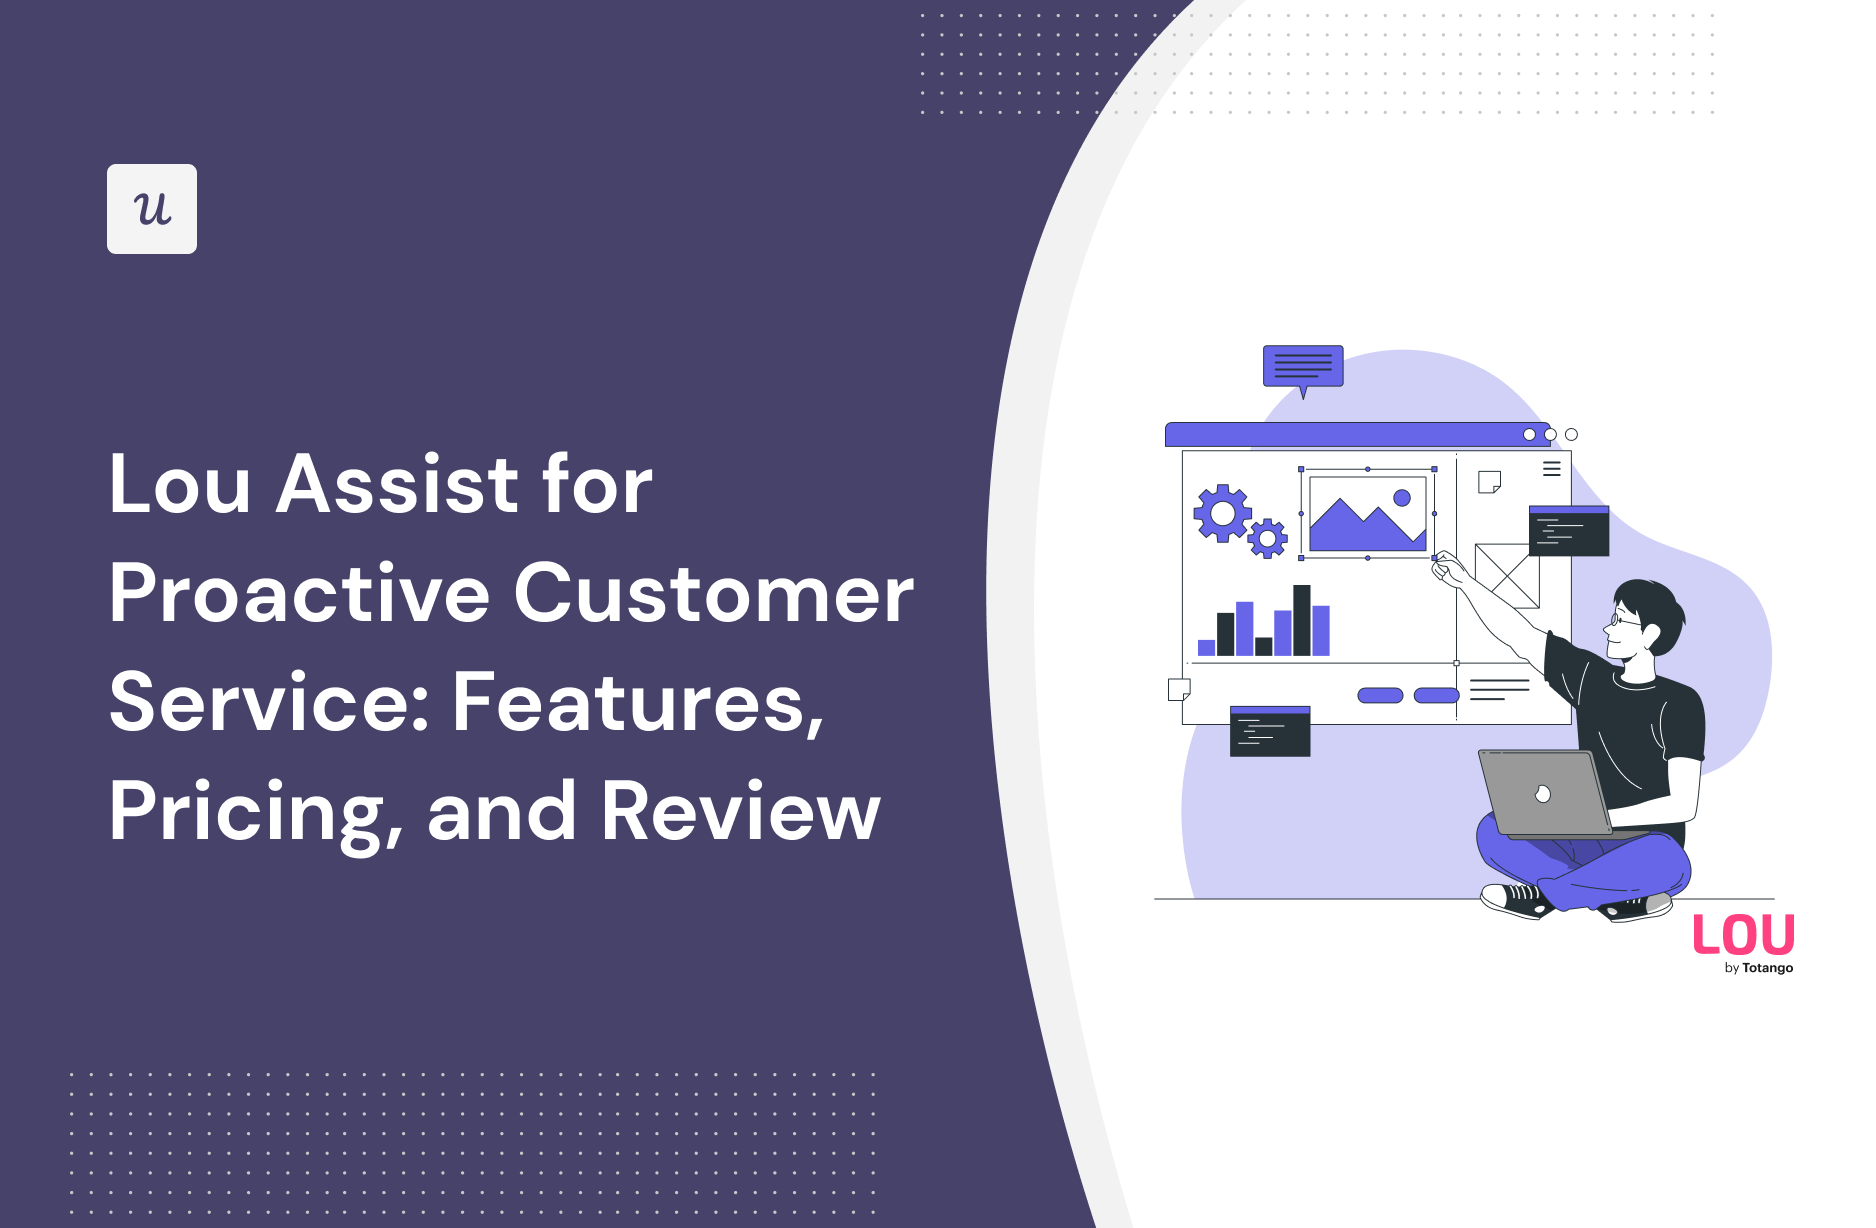 Lou Assist for Proactive Customer Service: Features, Pricing, and Review